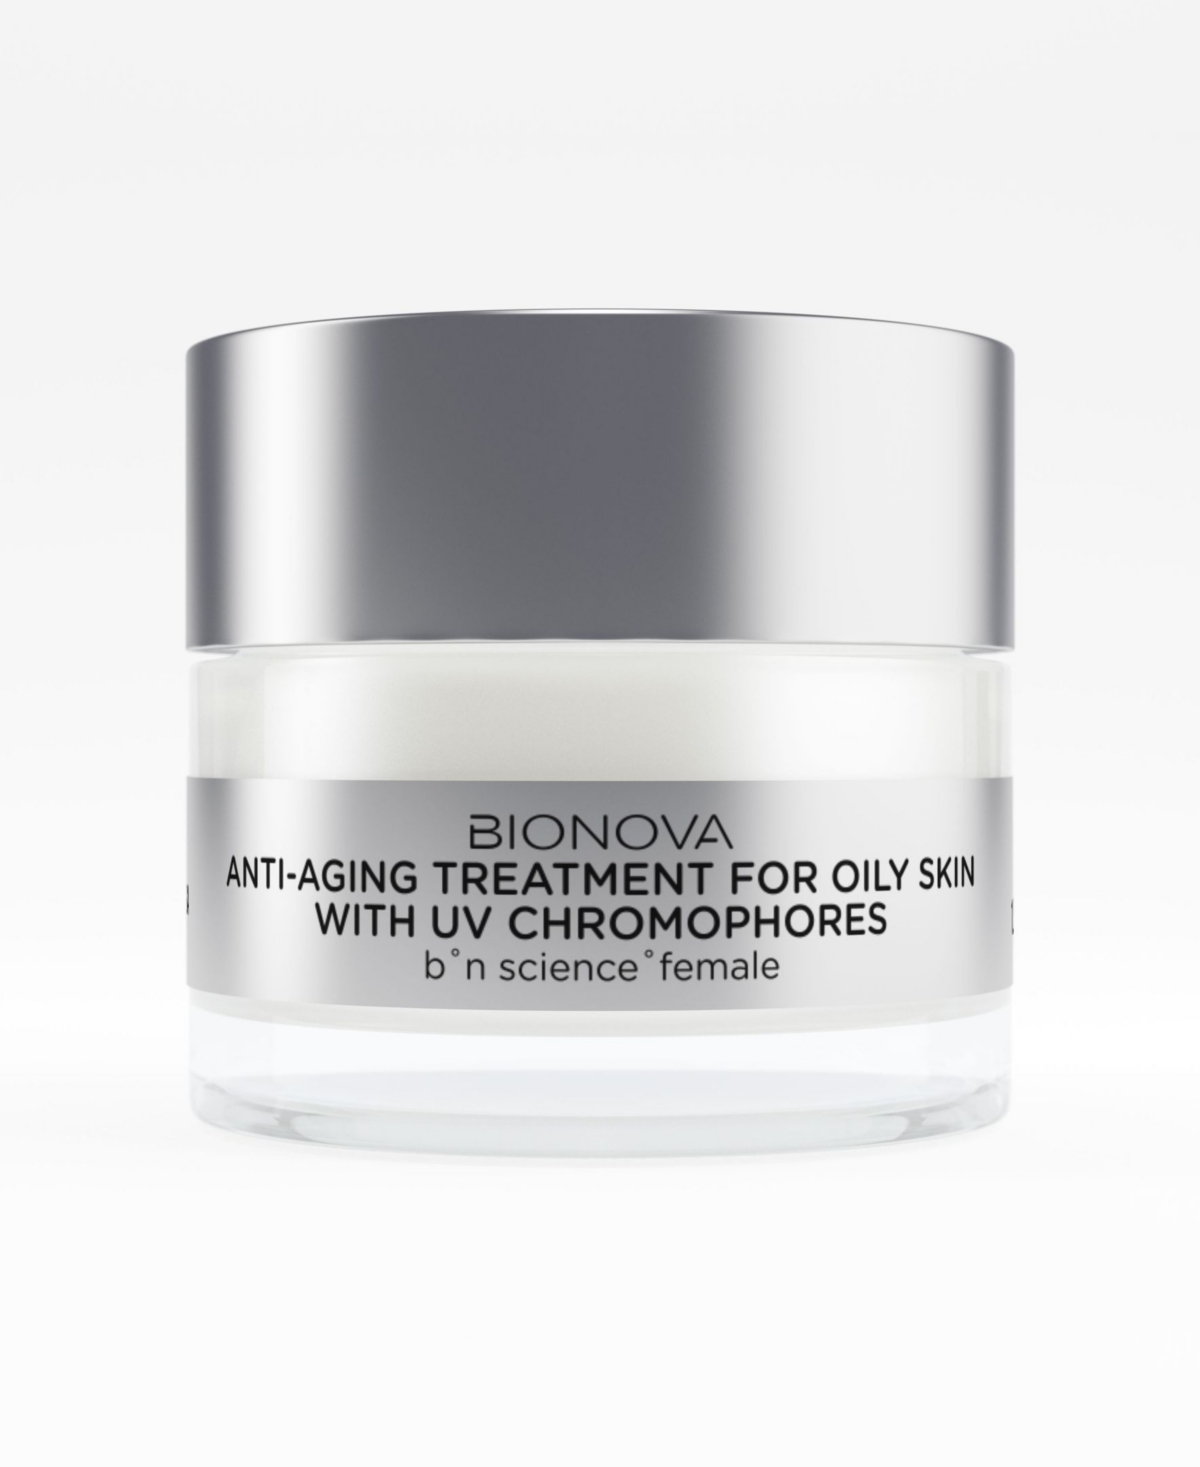 Treatment With Uv Chromophores For Oily Skin - Off-white